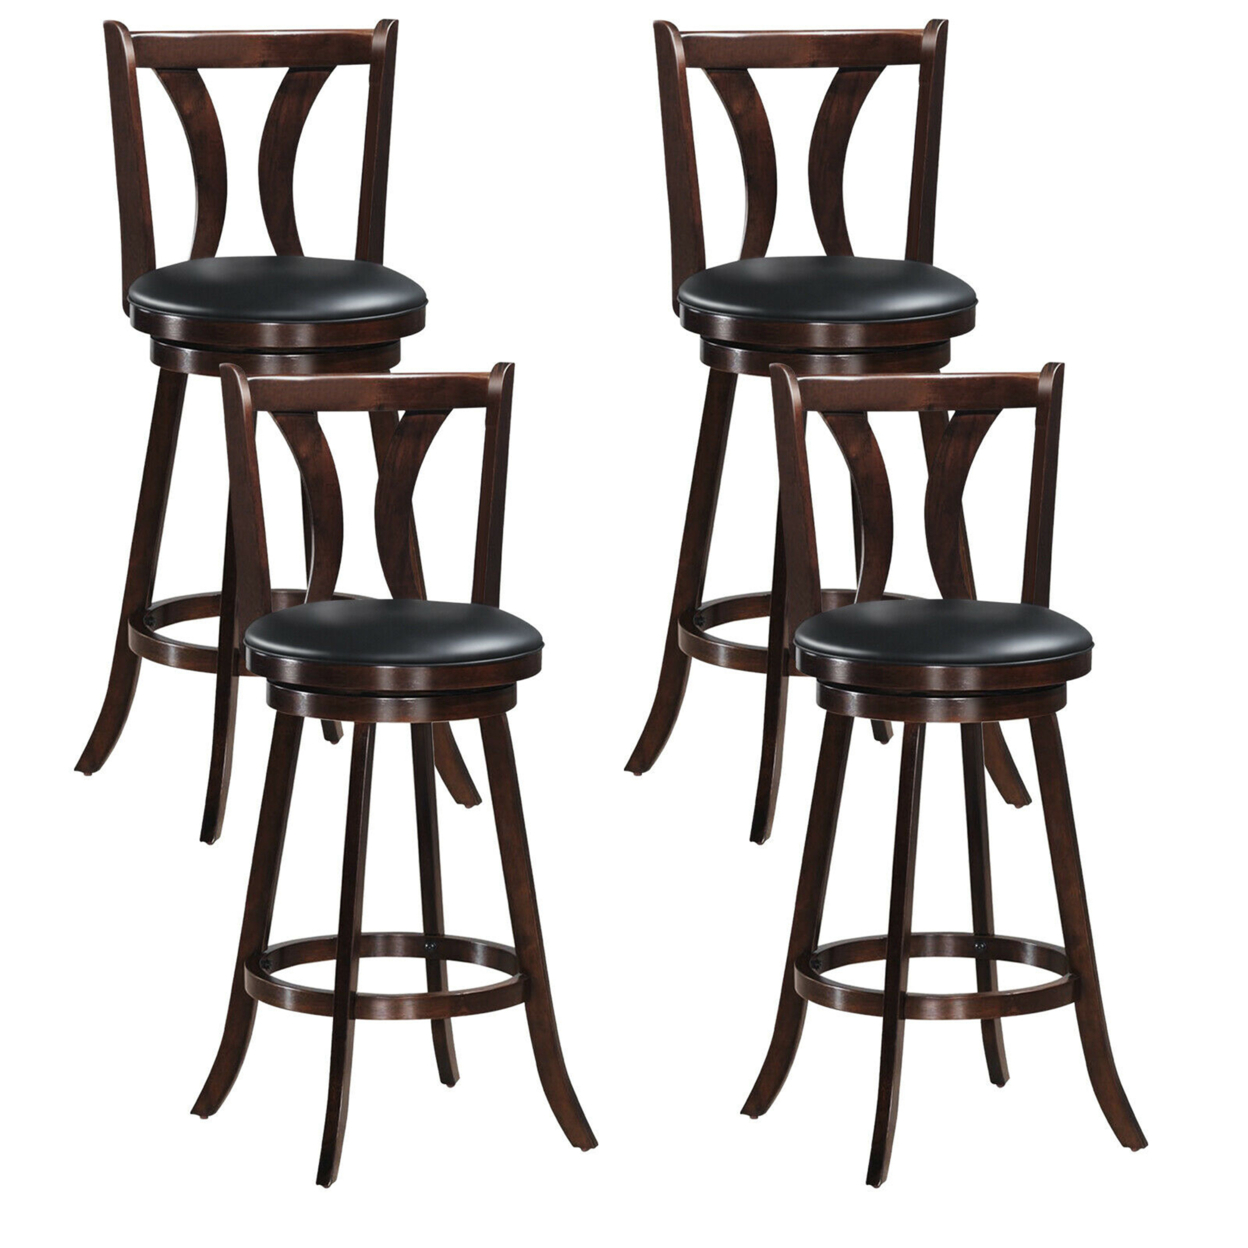 Set Of 4 Swivel Bar Stools 29.5 Bar Height Chairs With Rubber Wood Legs